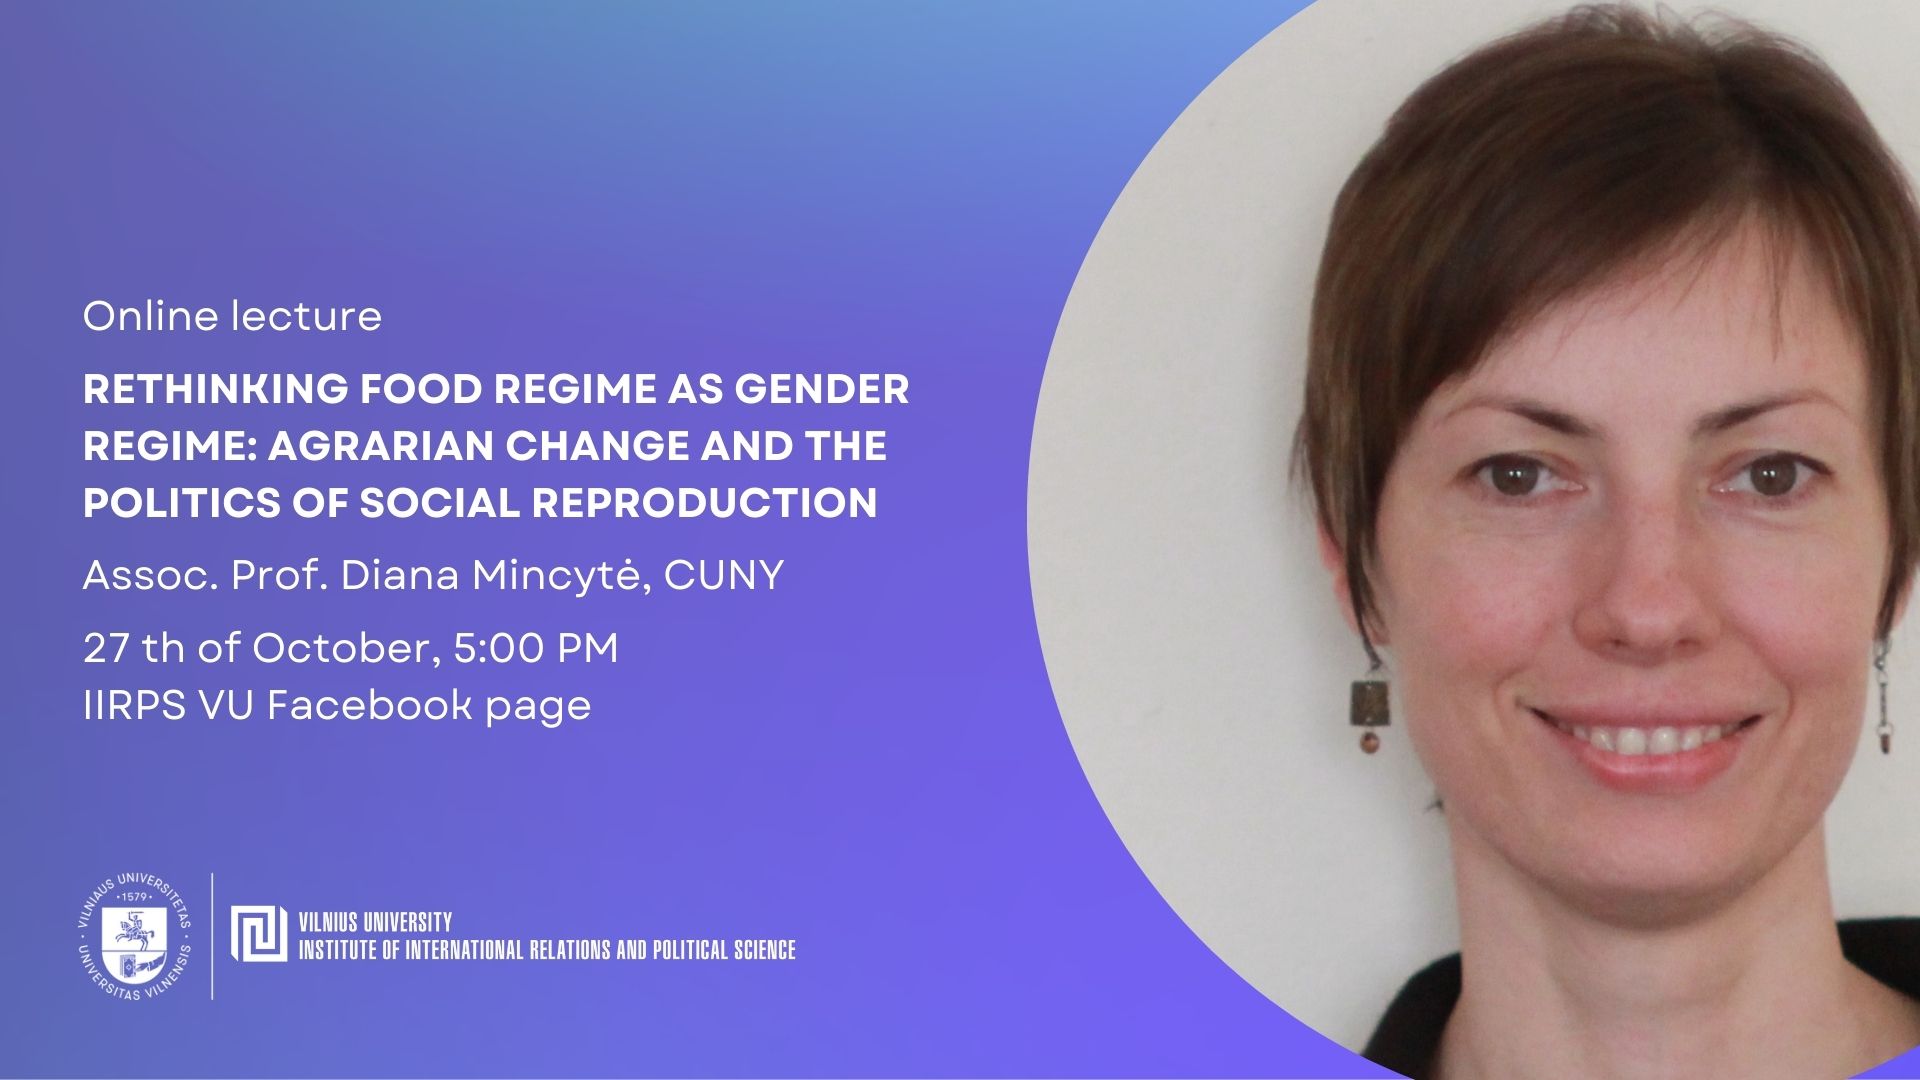 Online lecture “Rethinking Food Regime as Gender Regime: Agrarian Change and the Politics of Social Reproduction”